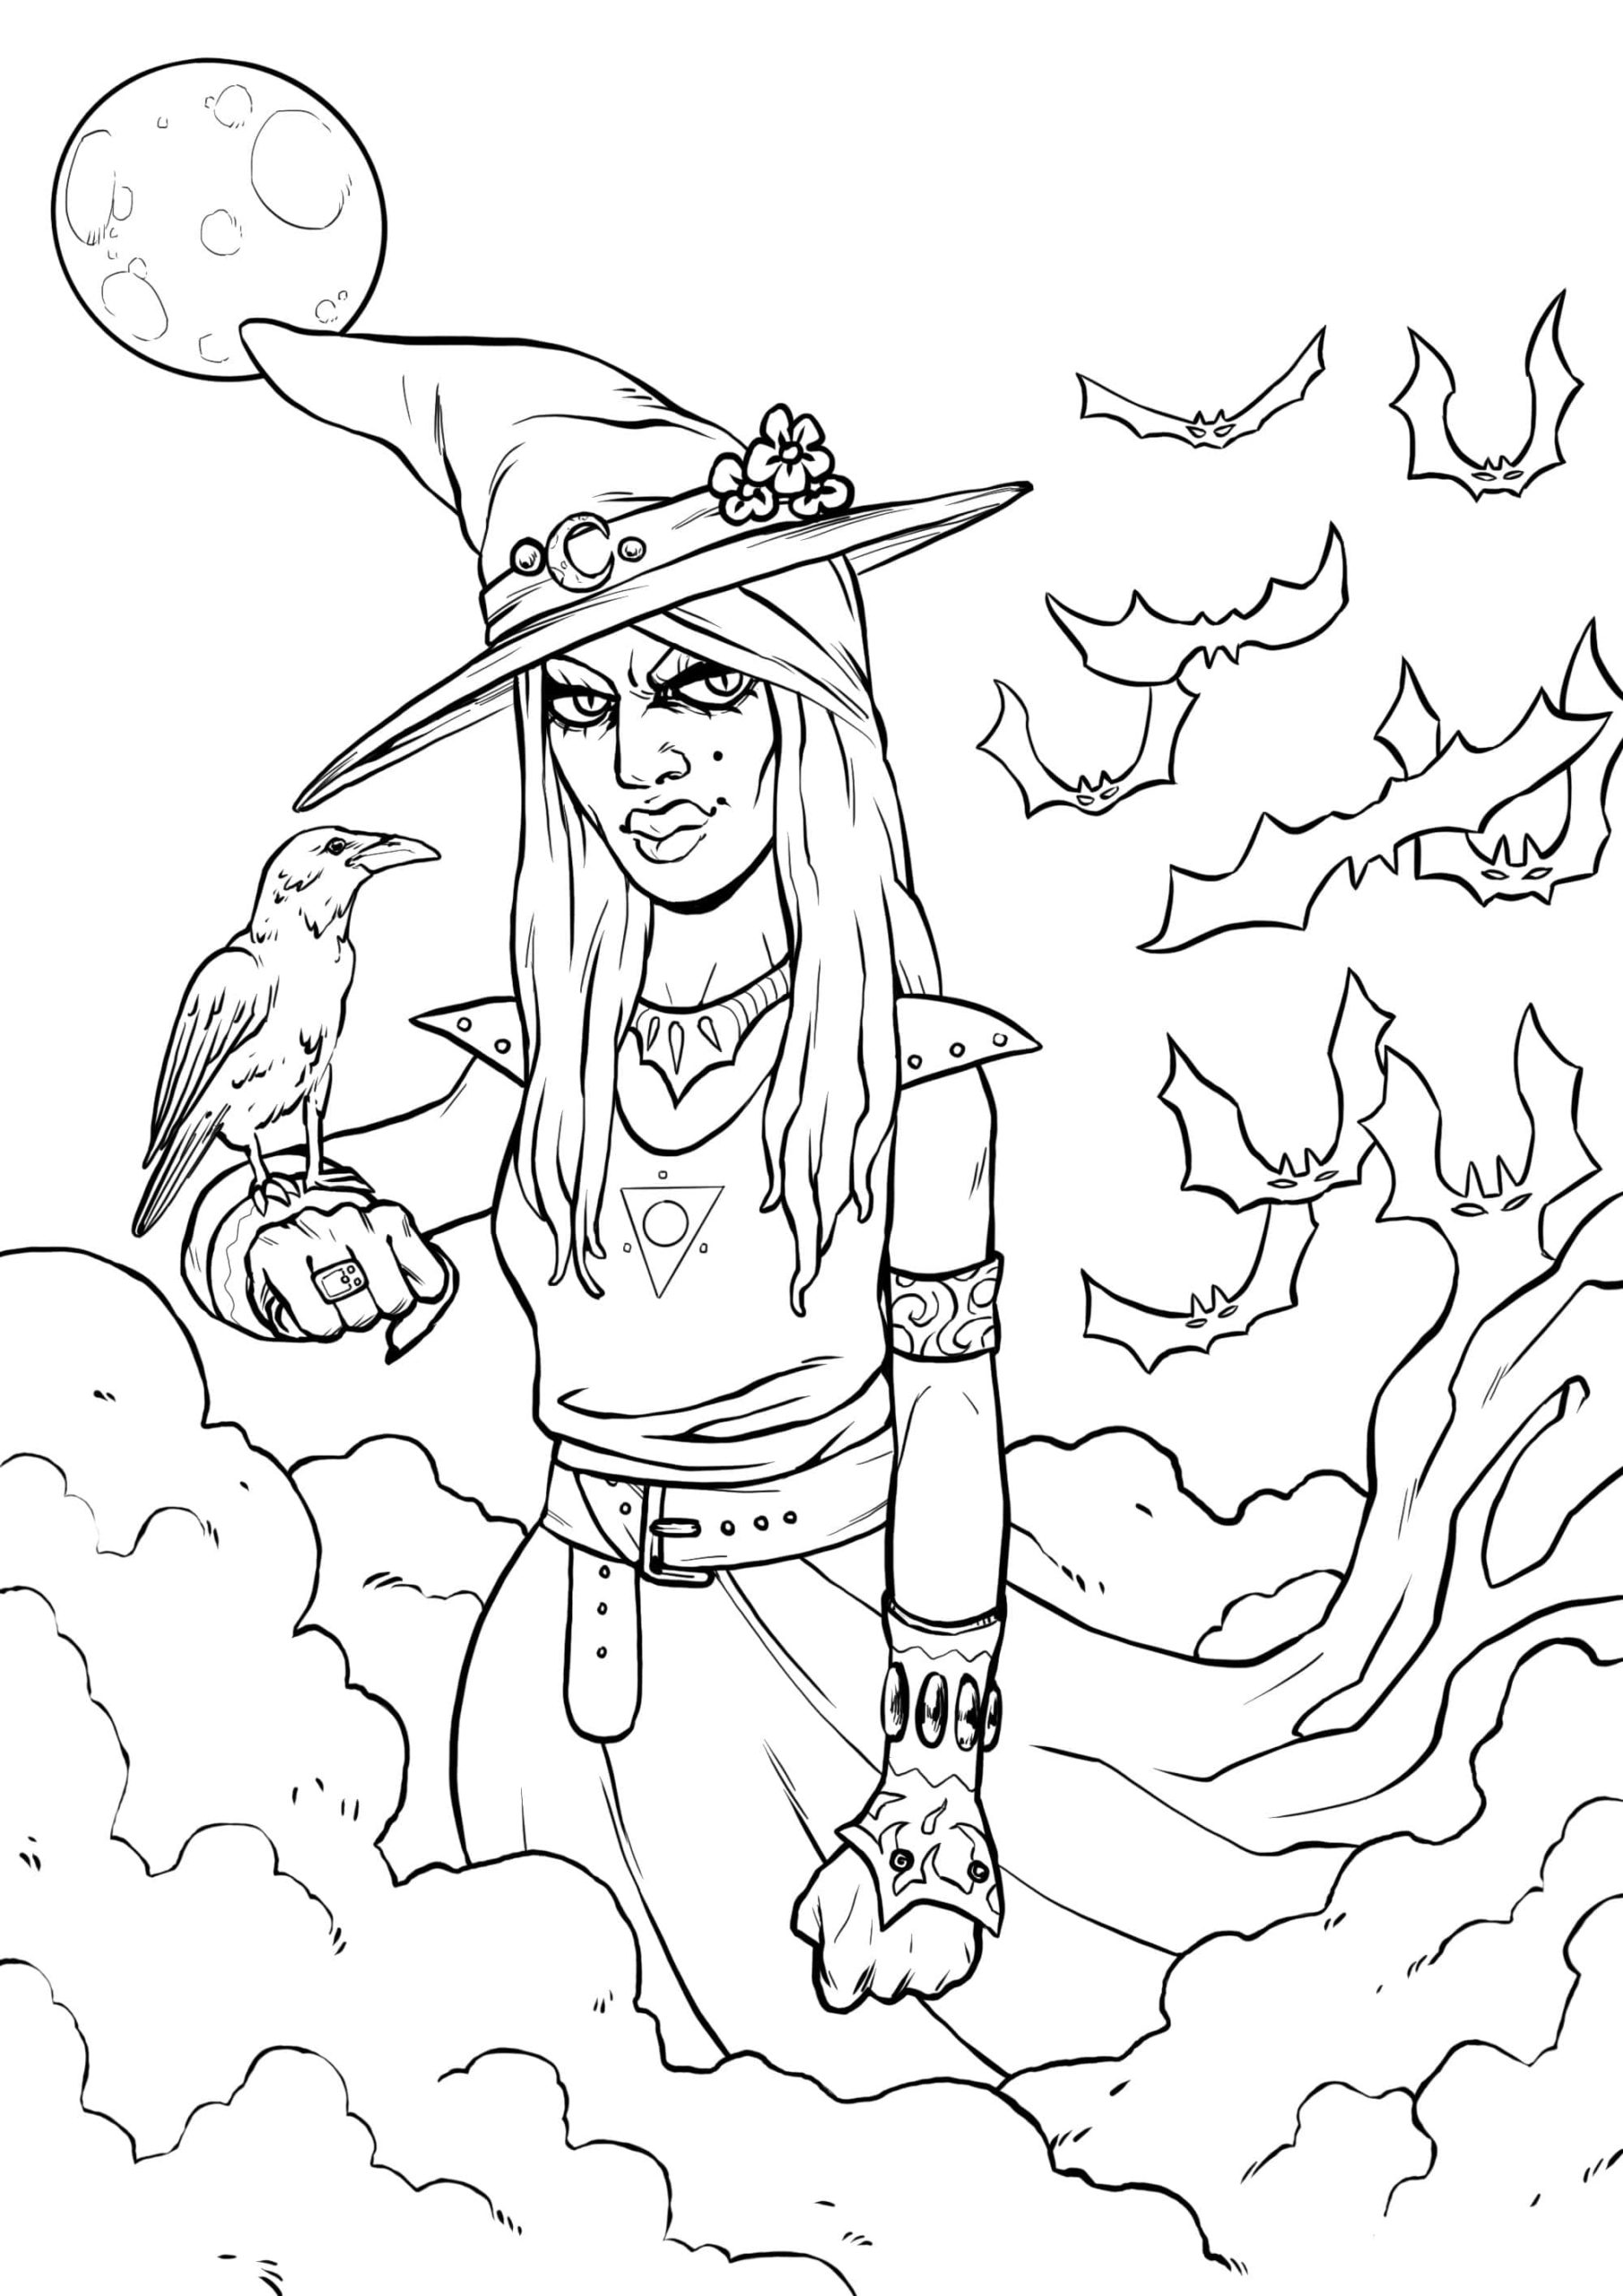 Fierce Witch | halloween coloring pages for adults pdf | scary coloring pages for adults